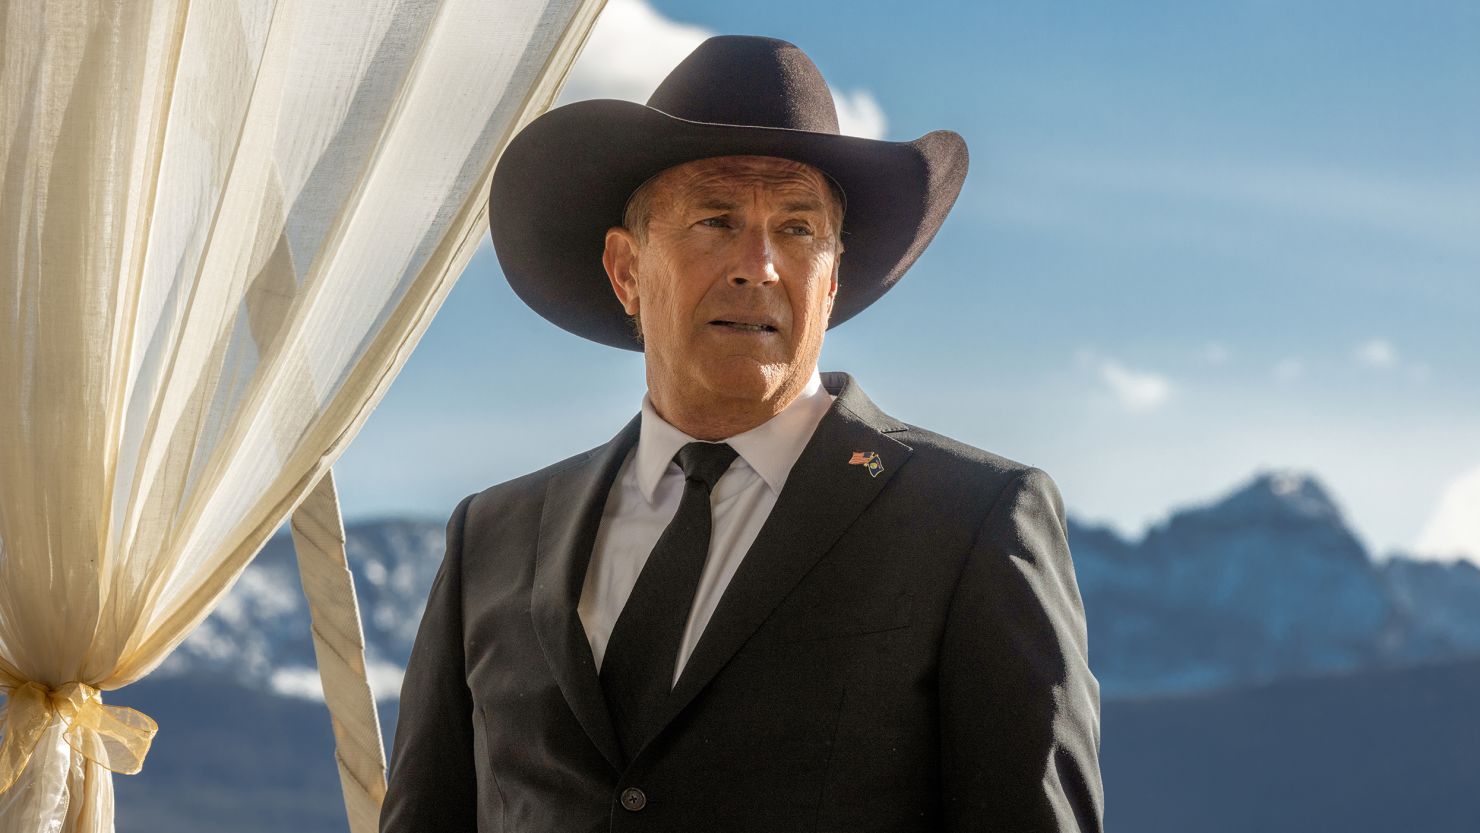 Exclusive Update 'Yellowstone' Season 5B and Spinoff Buzz - What's Next Without Kevin Costner--